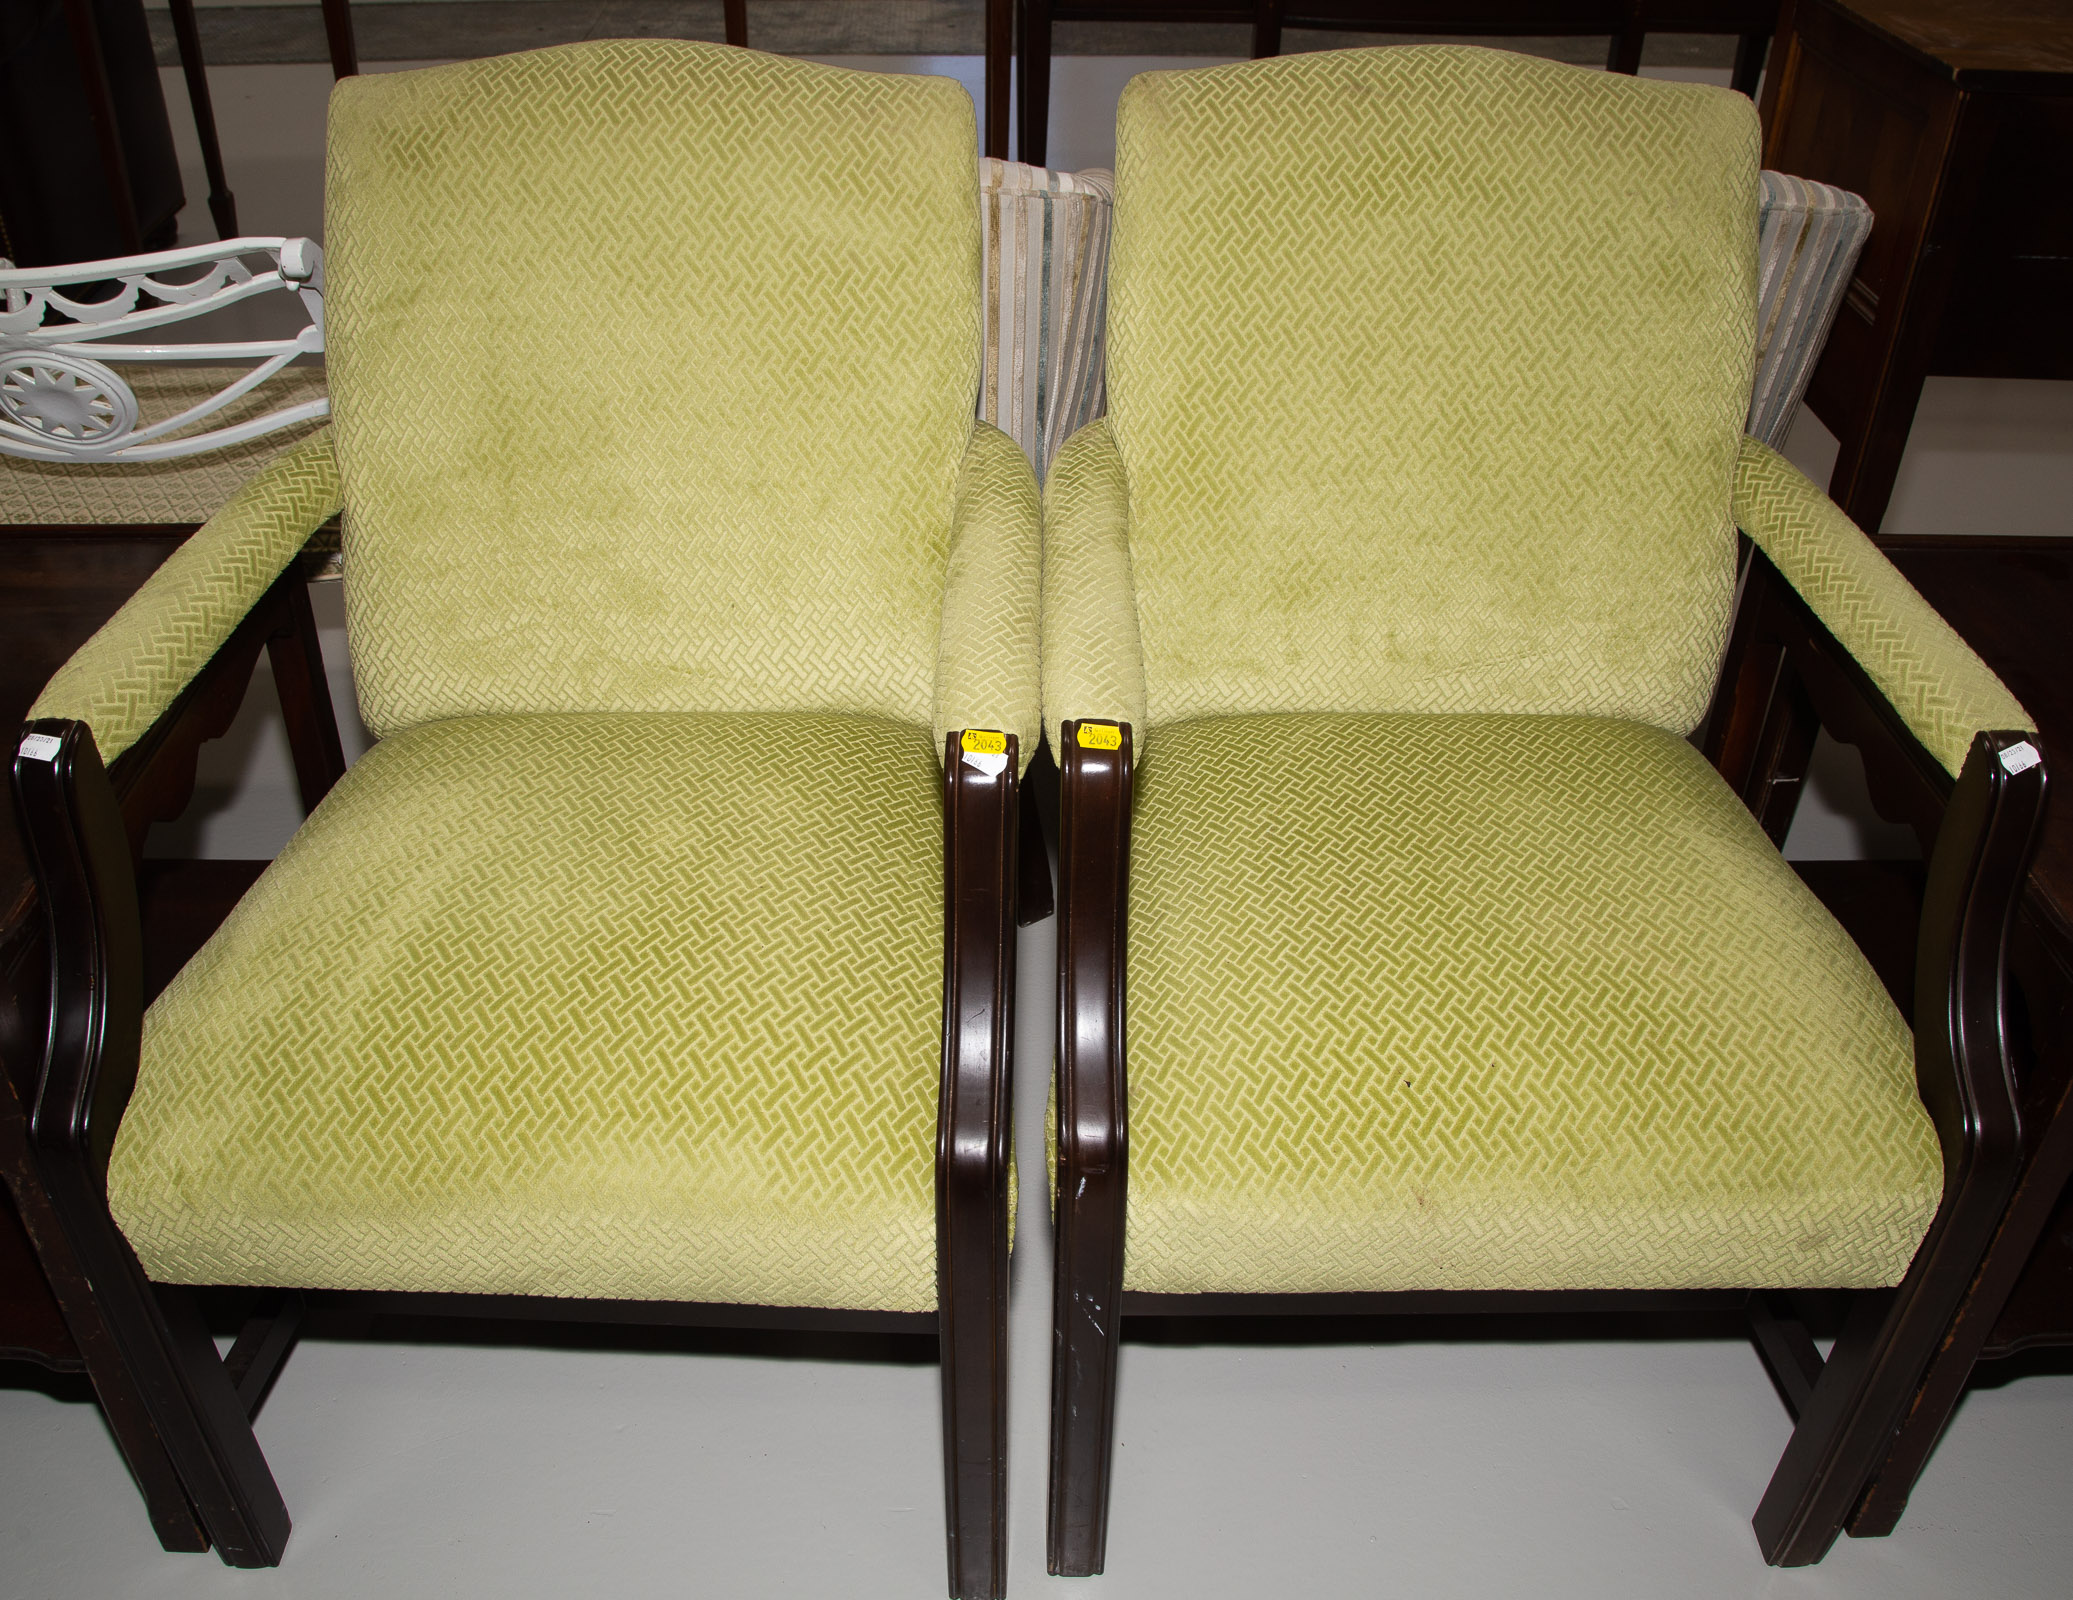 TWO ART DECO STYLE UPHOLSTERED 33509d